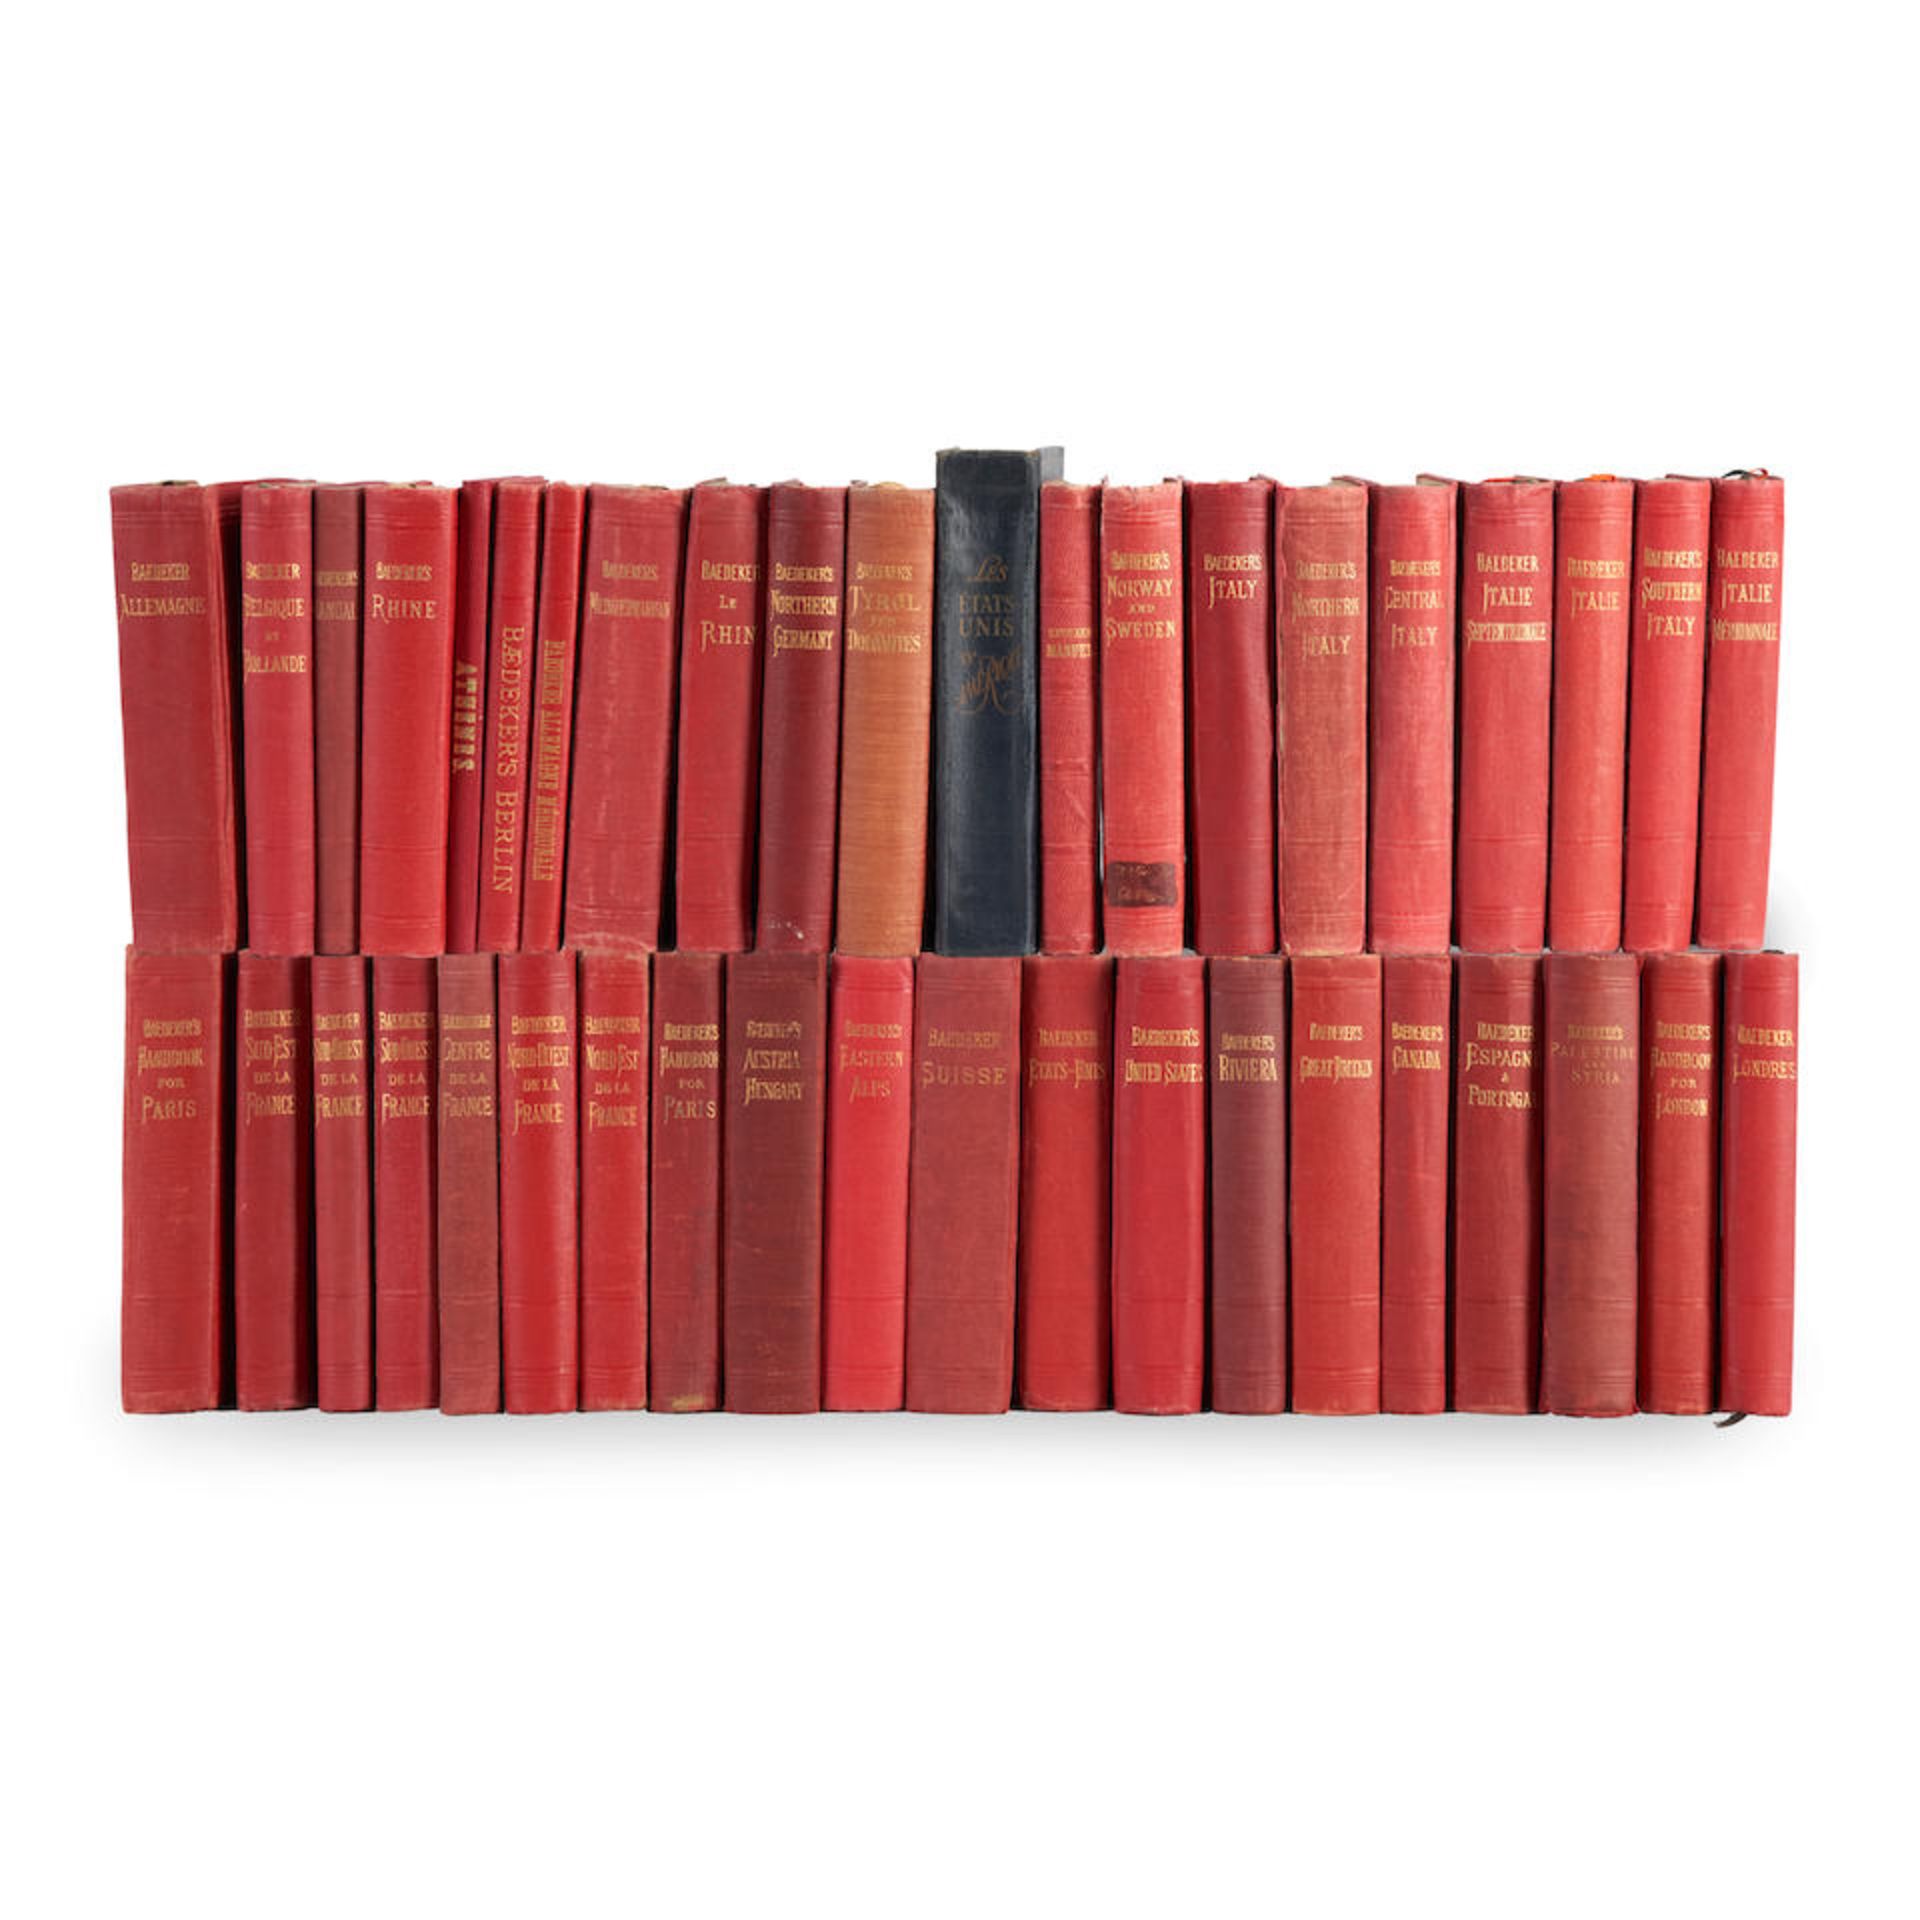 BAEDEKER'S TRAVEL GUIDES. A group of 40 Baedeker travel guides, [Early 20th century].